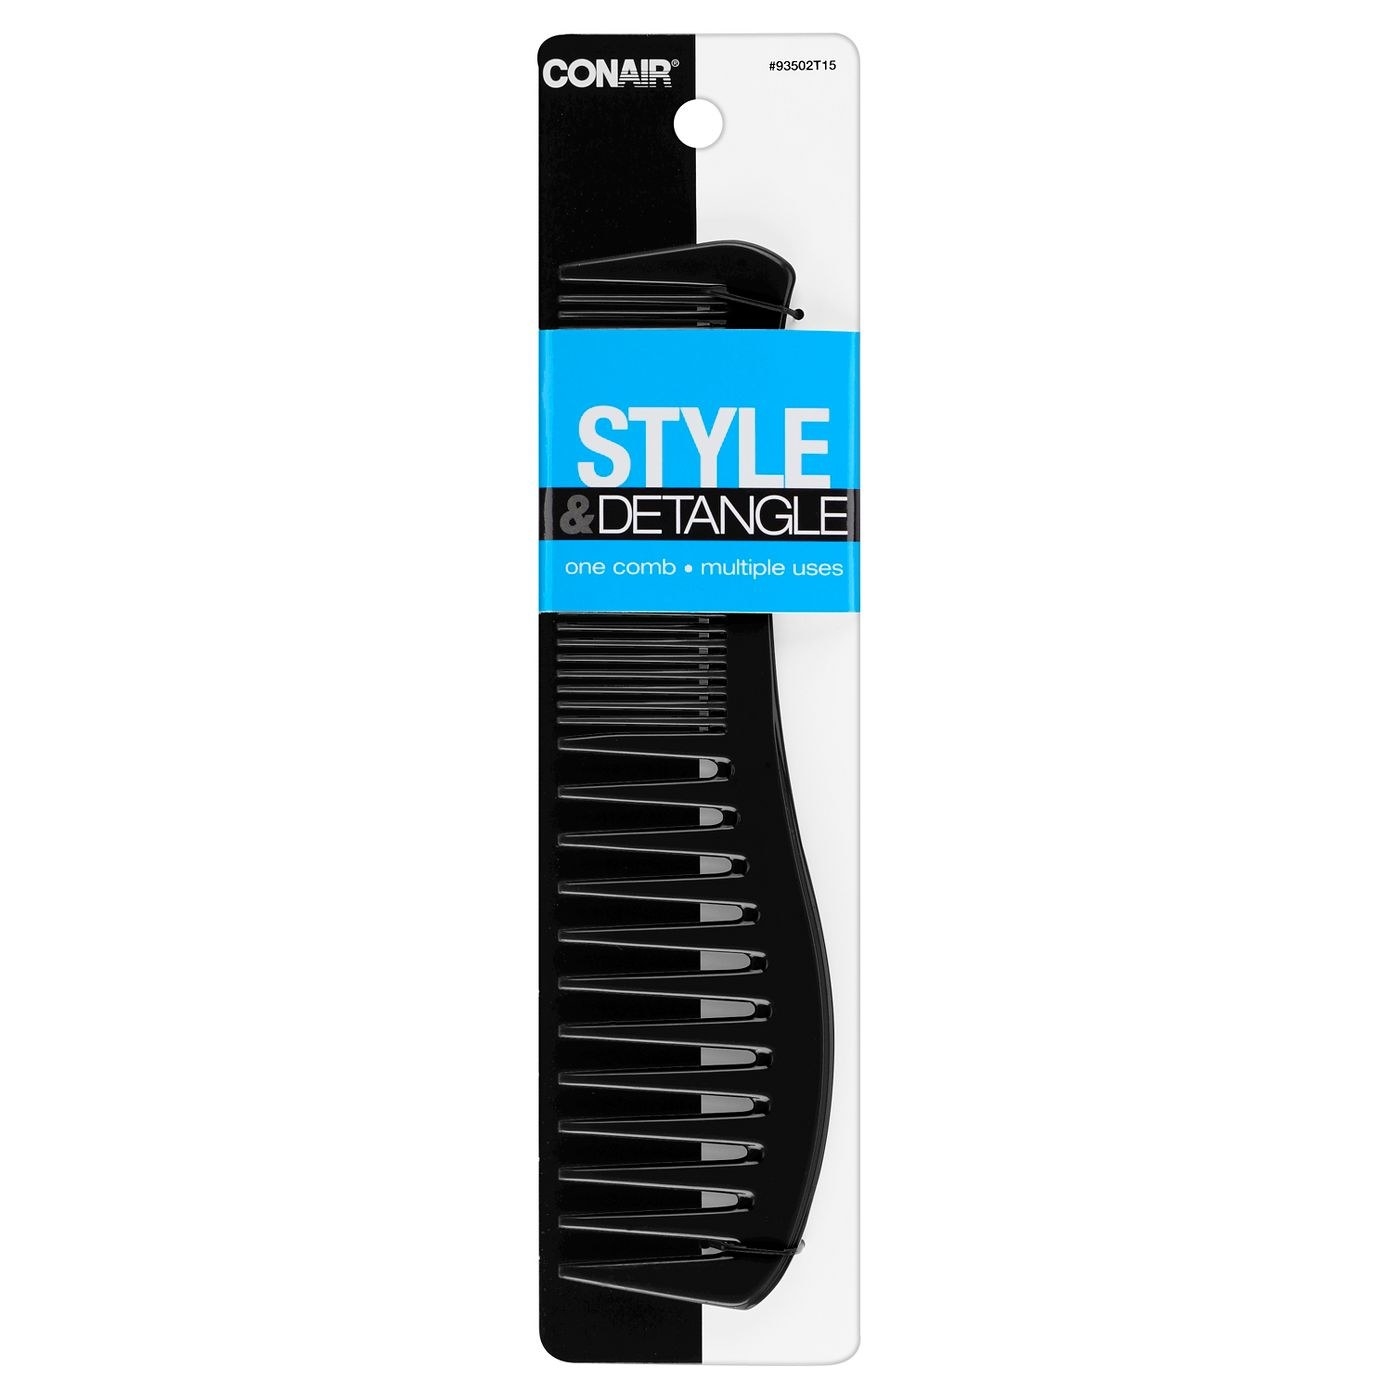 An image of a wide tooth lift comb for all hair types